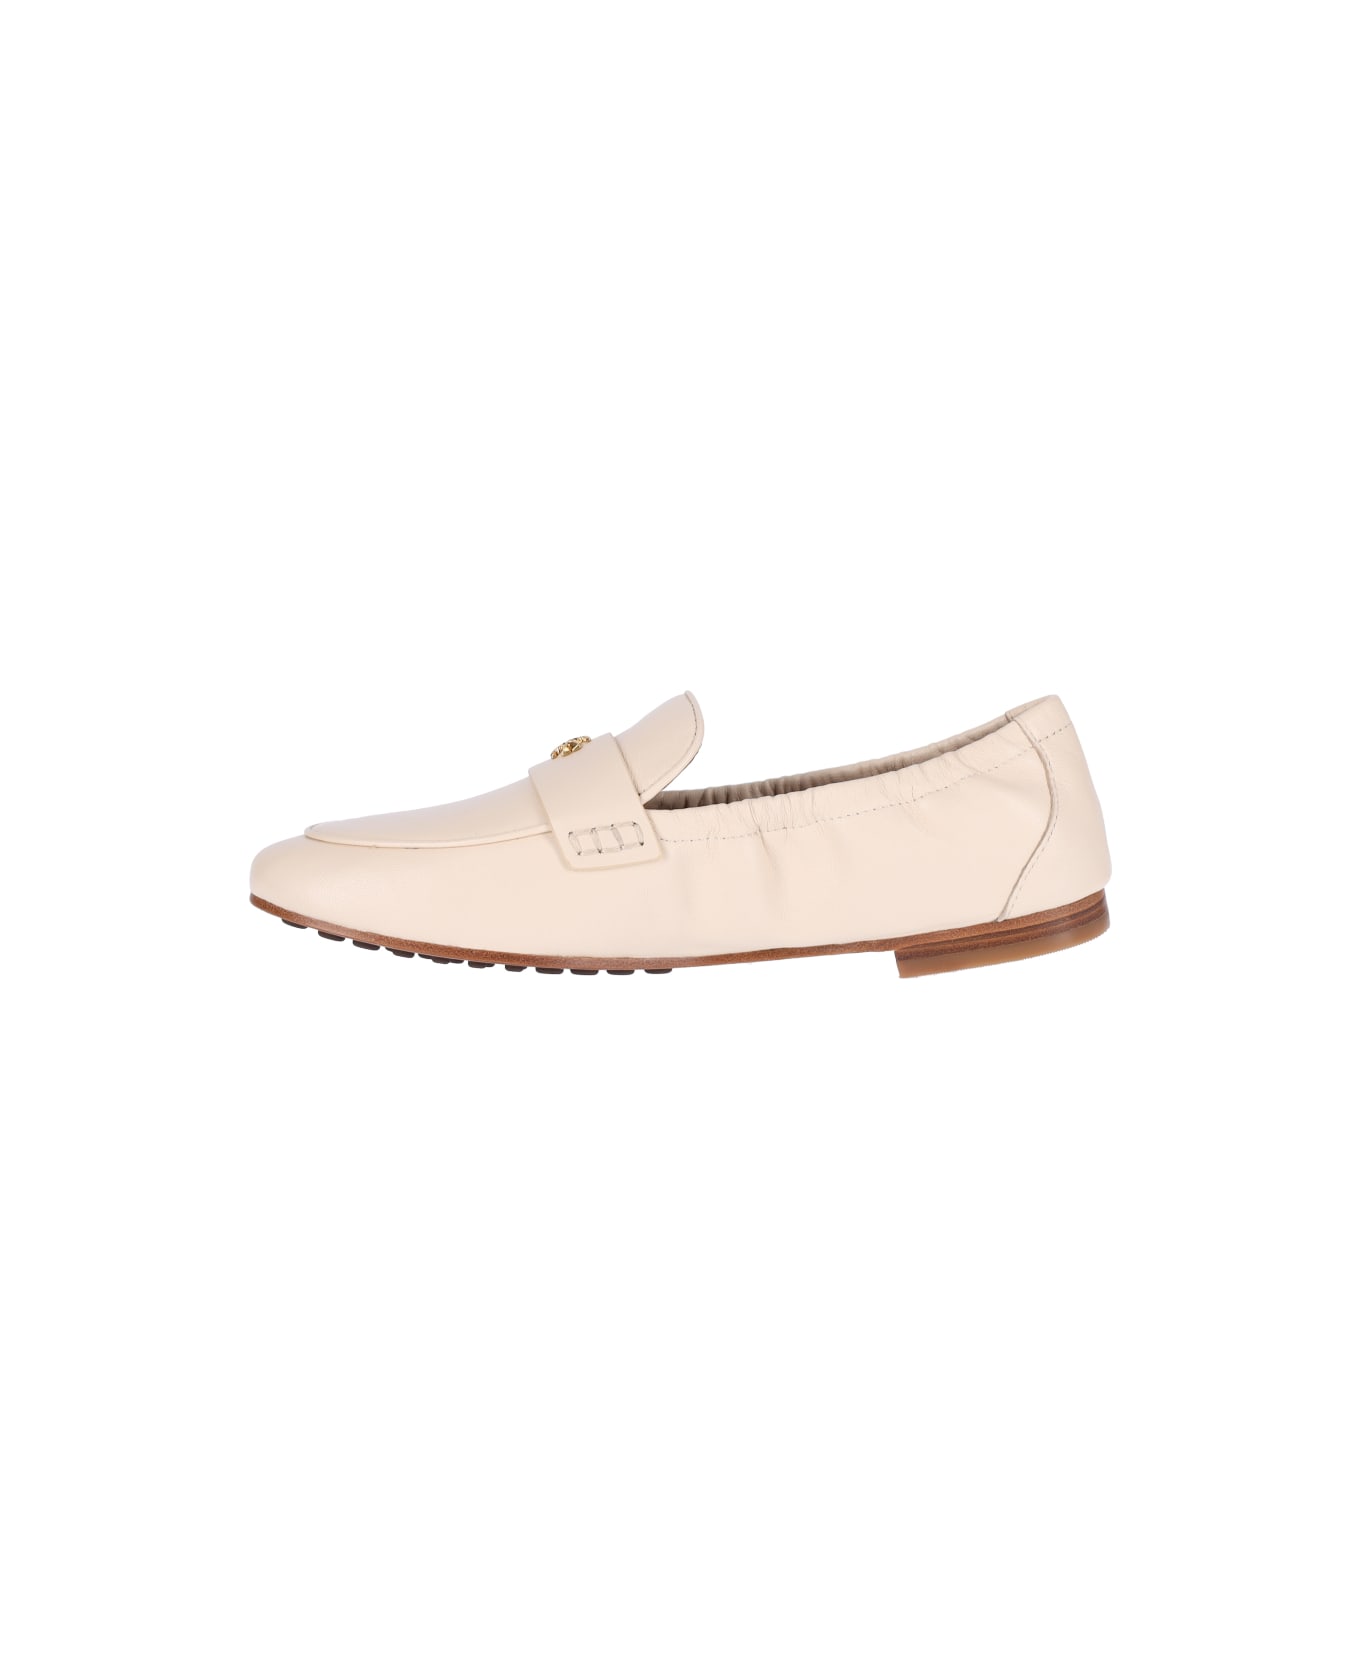 Tory Burch Leather Ballet Loafer - panna